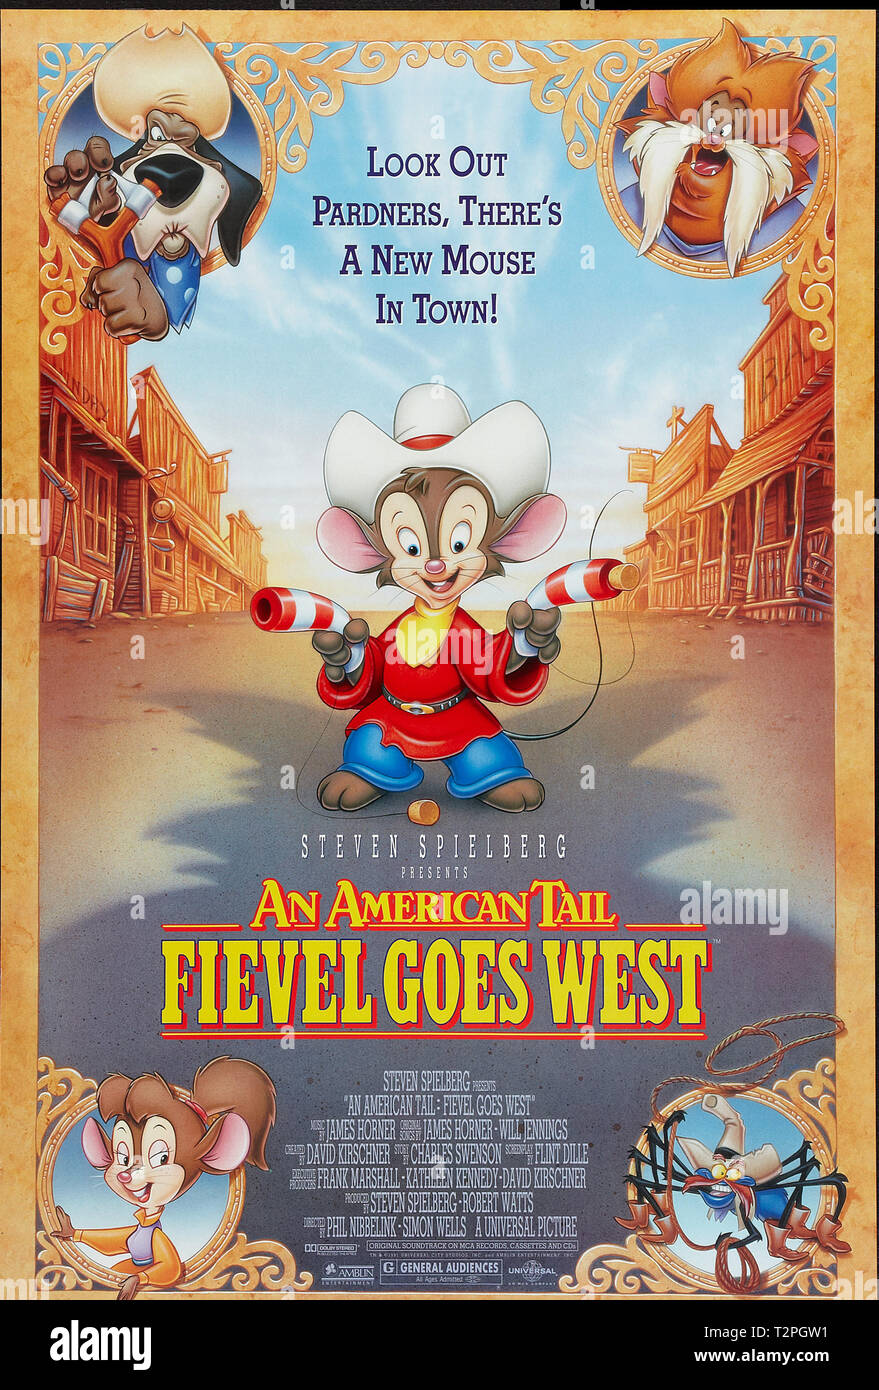 An American Tail Fievel Goes West Logo